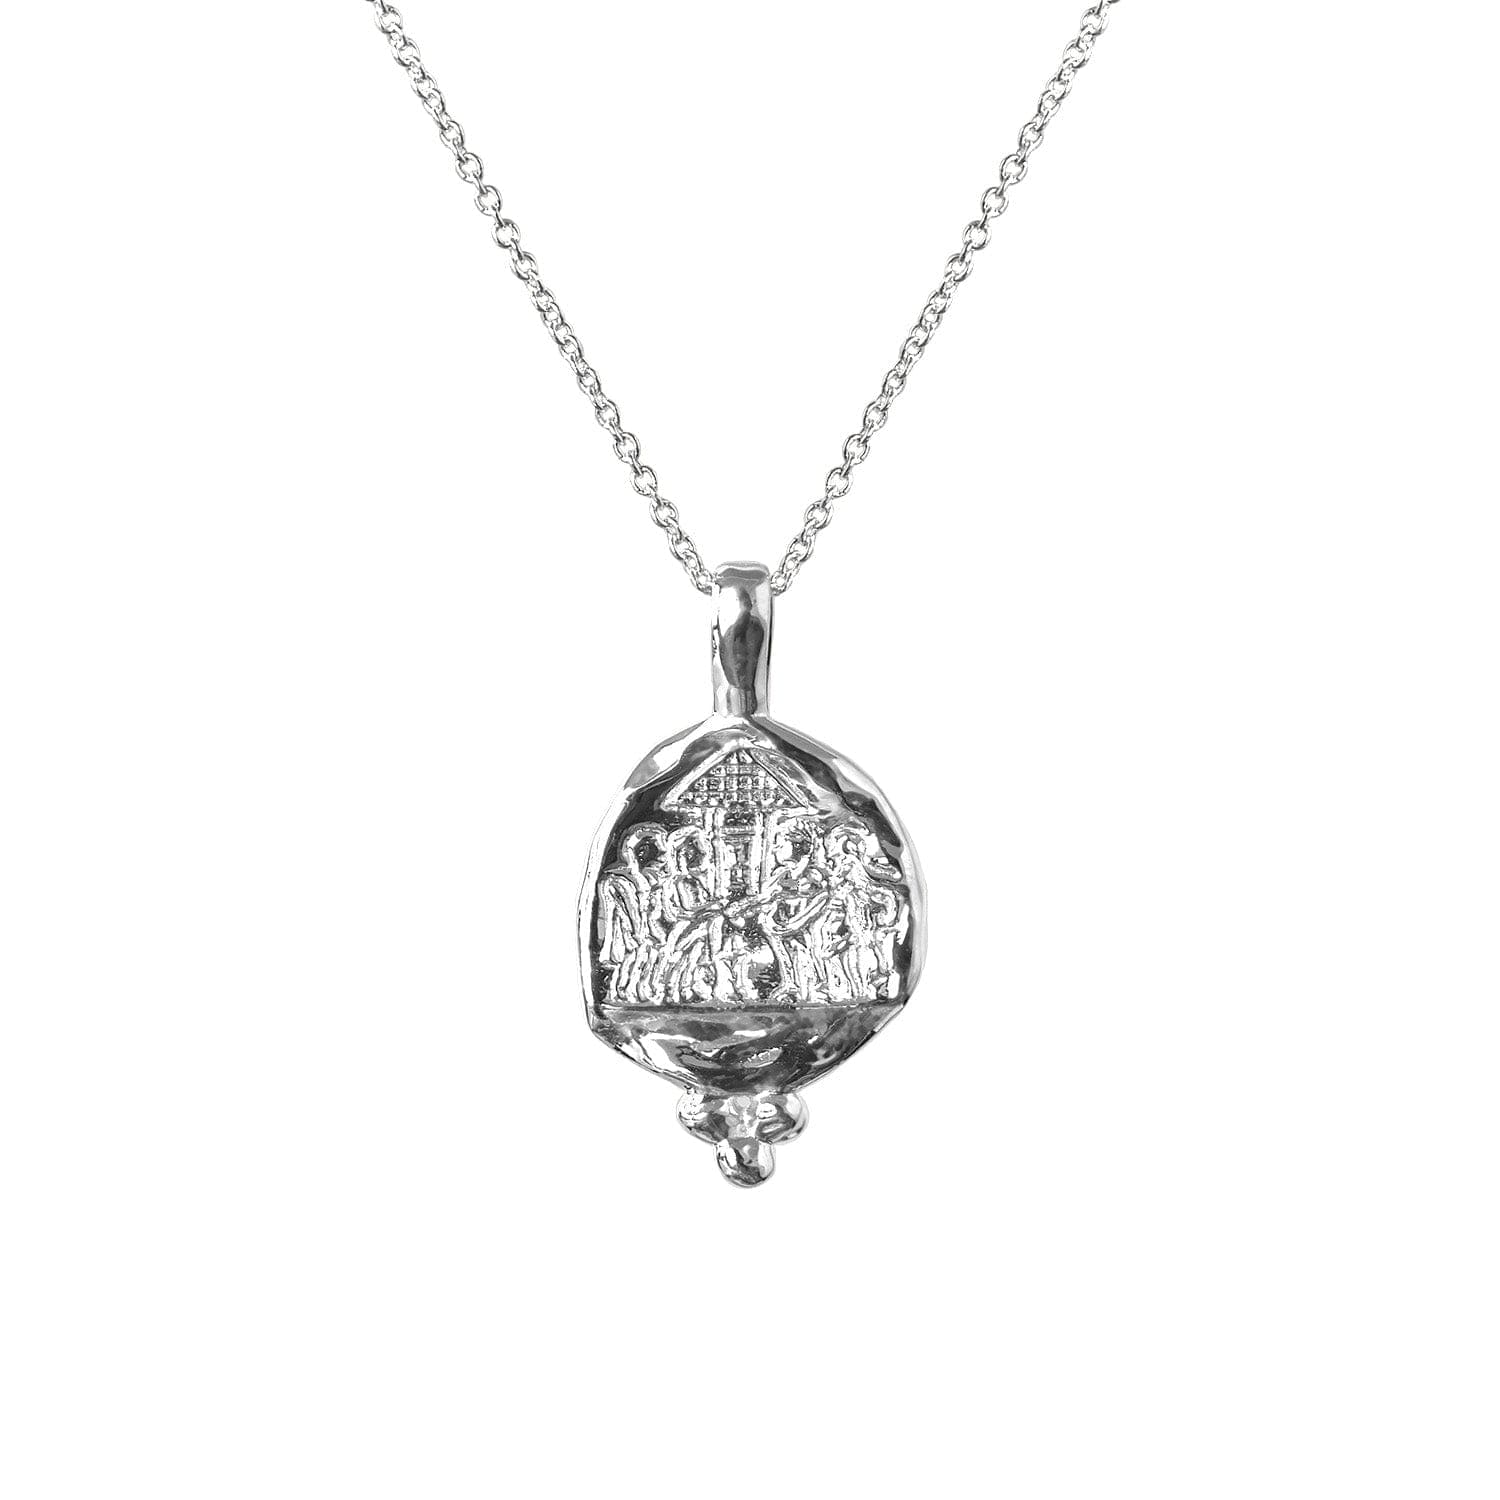 Vestal Virgins at the Temple Necklace |  Necklace - Common Era Jewelry